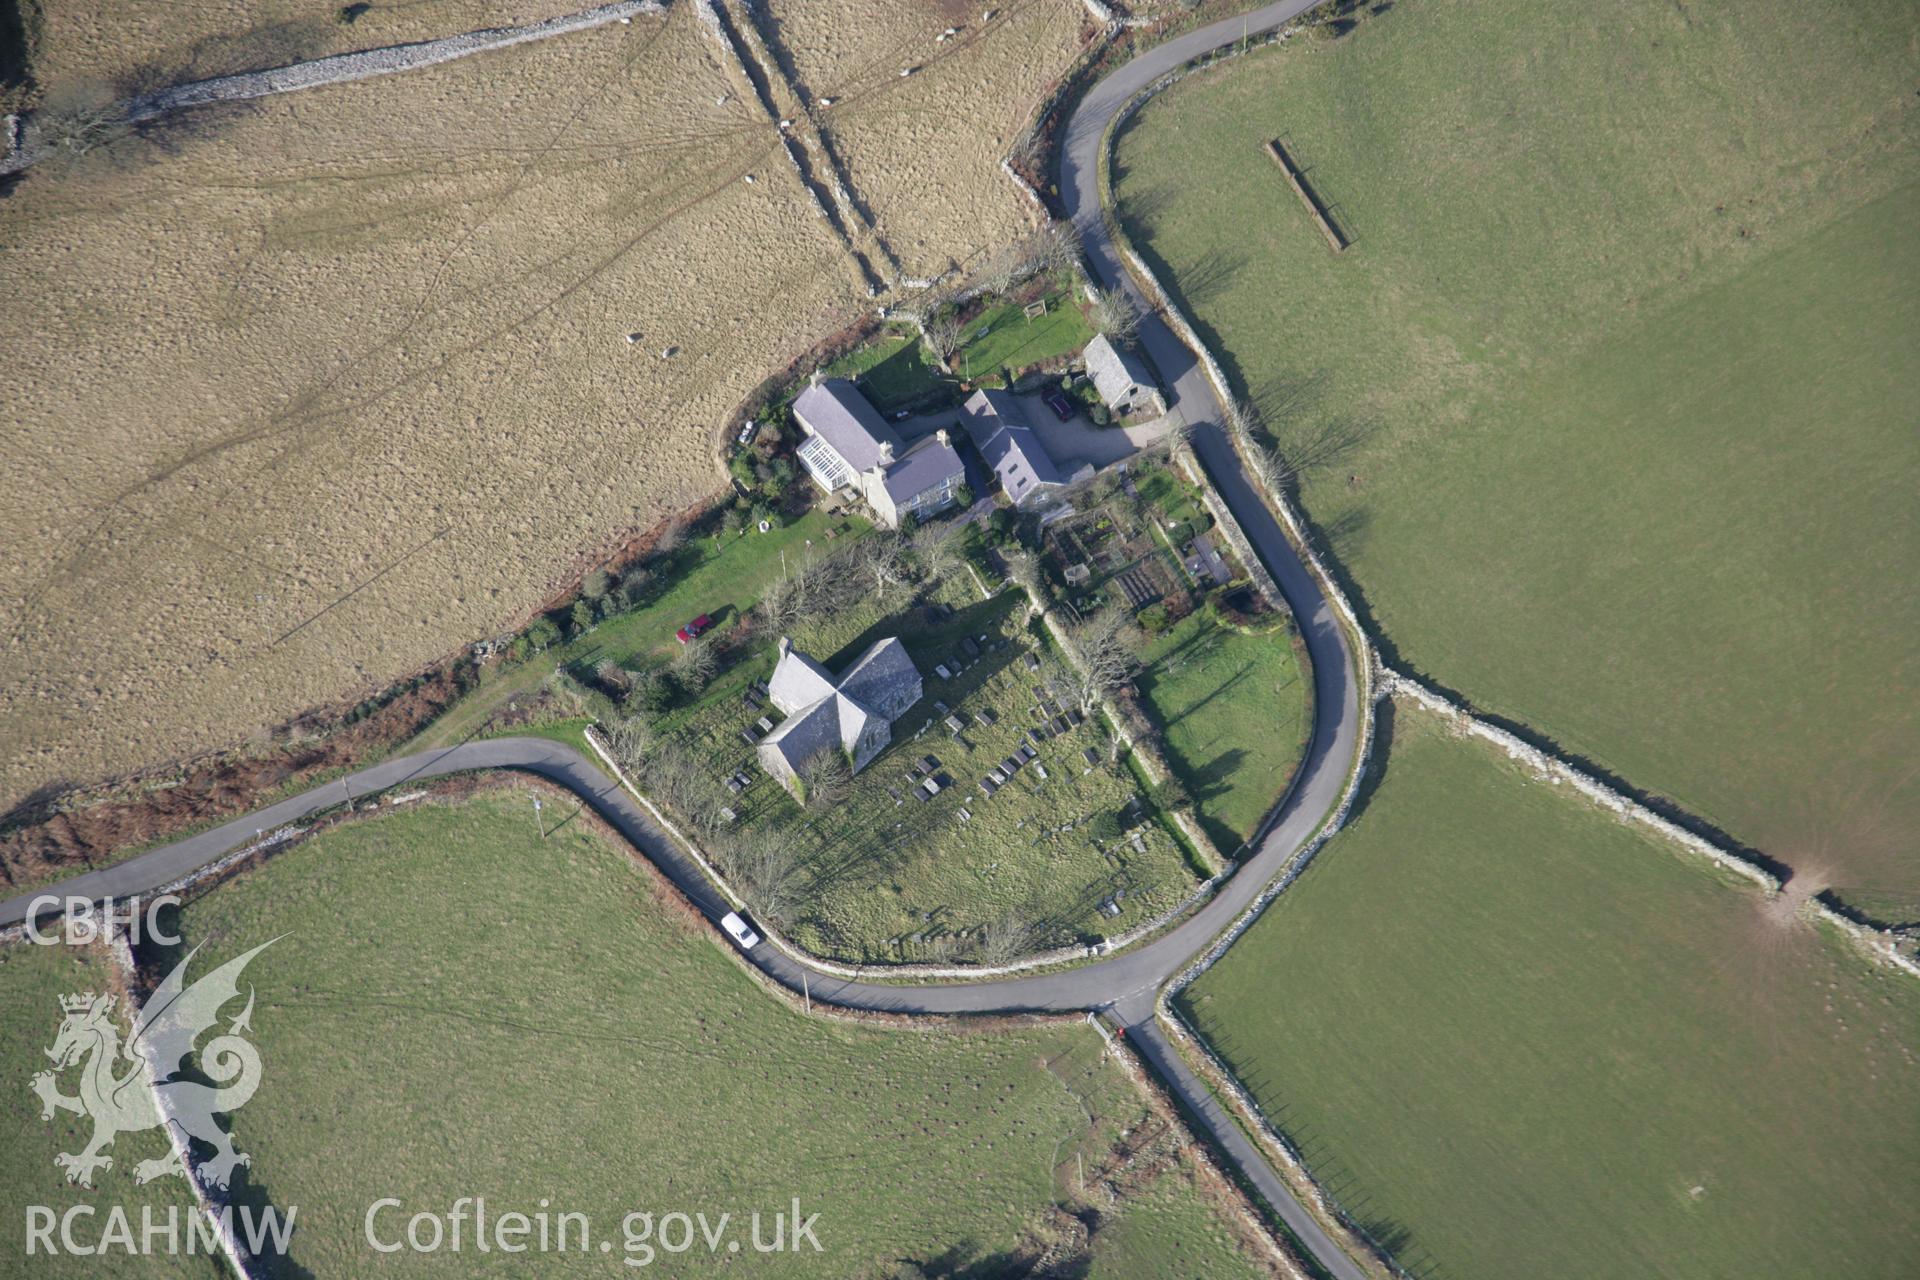 RCAHMW colour oblique aerial photograph of St Aelrhiw's Church, Rhiw, from the south-east. Taken on 09 February 2006 by Toby Driver.